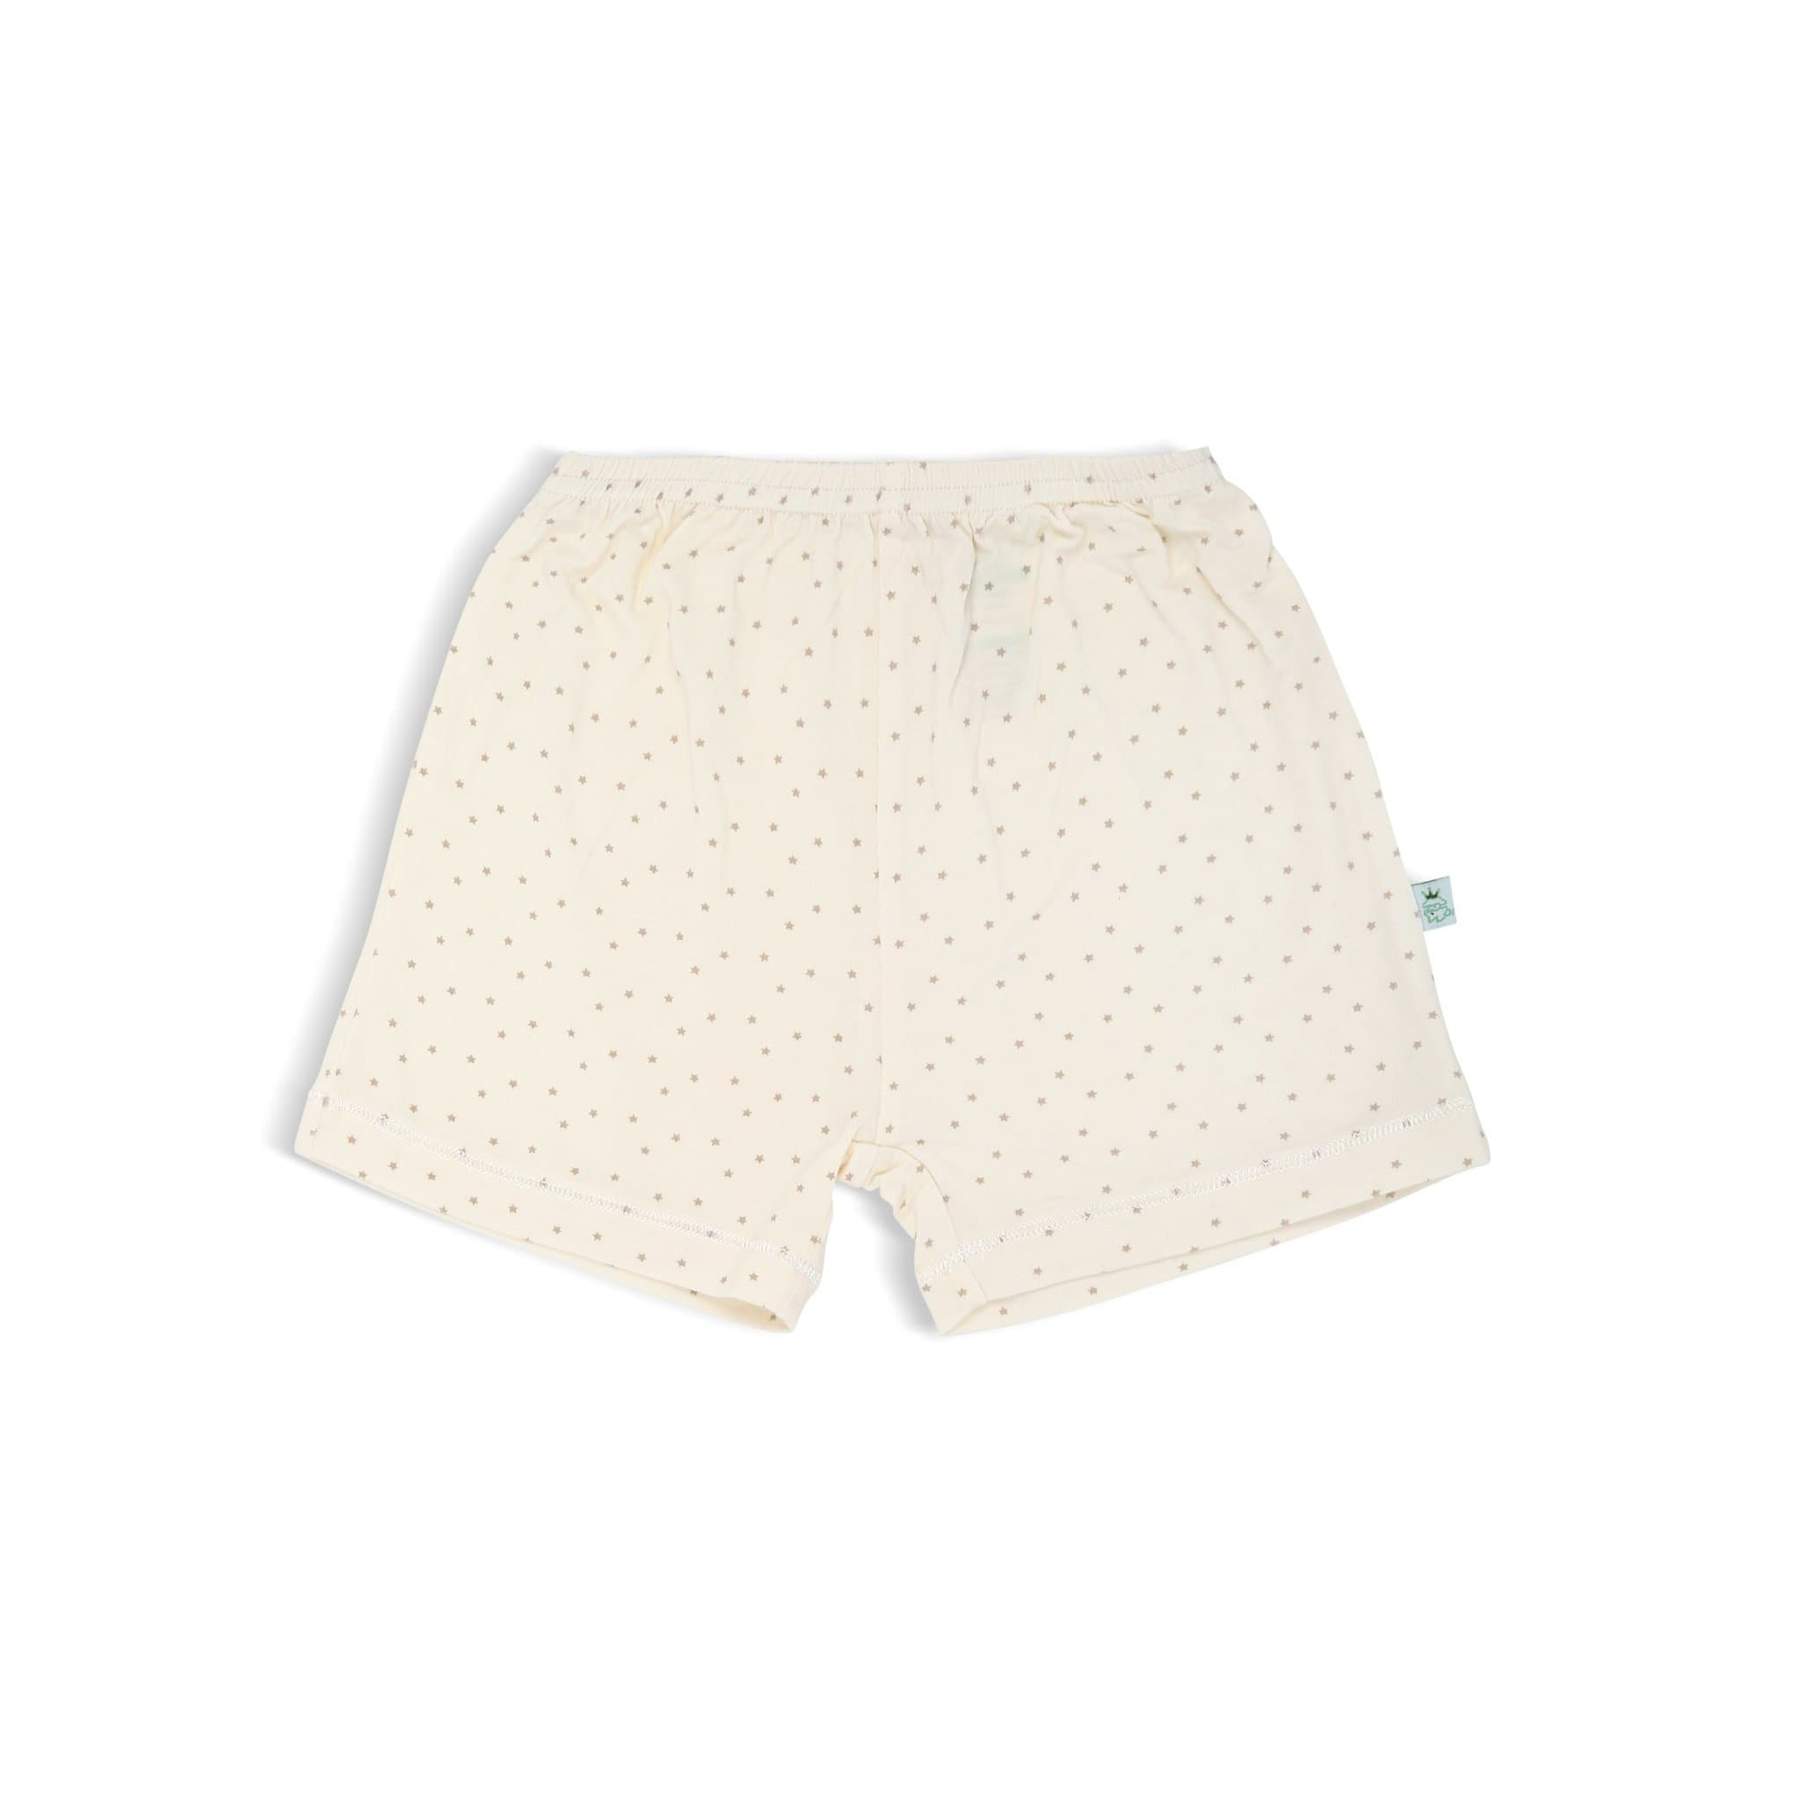 Simply Life Bamboo Shorts Star (0-3months)